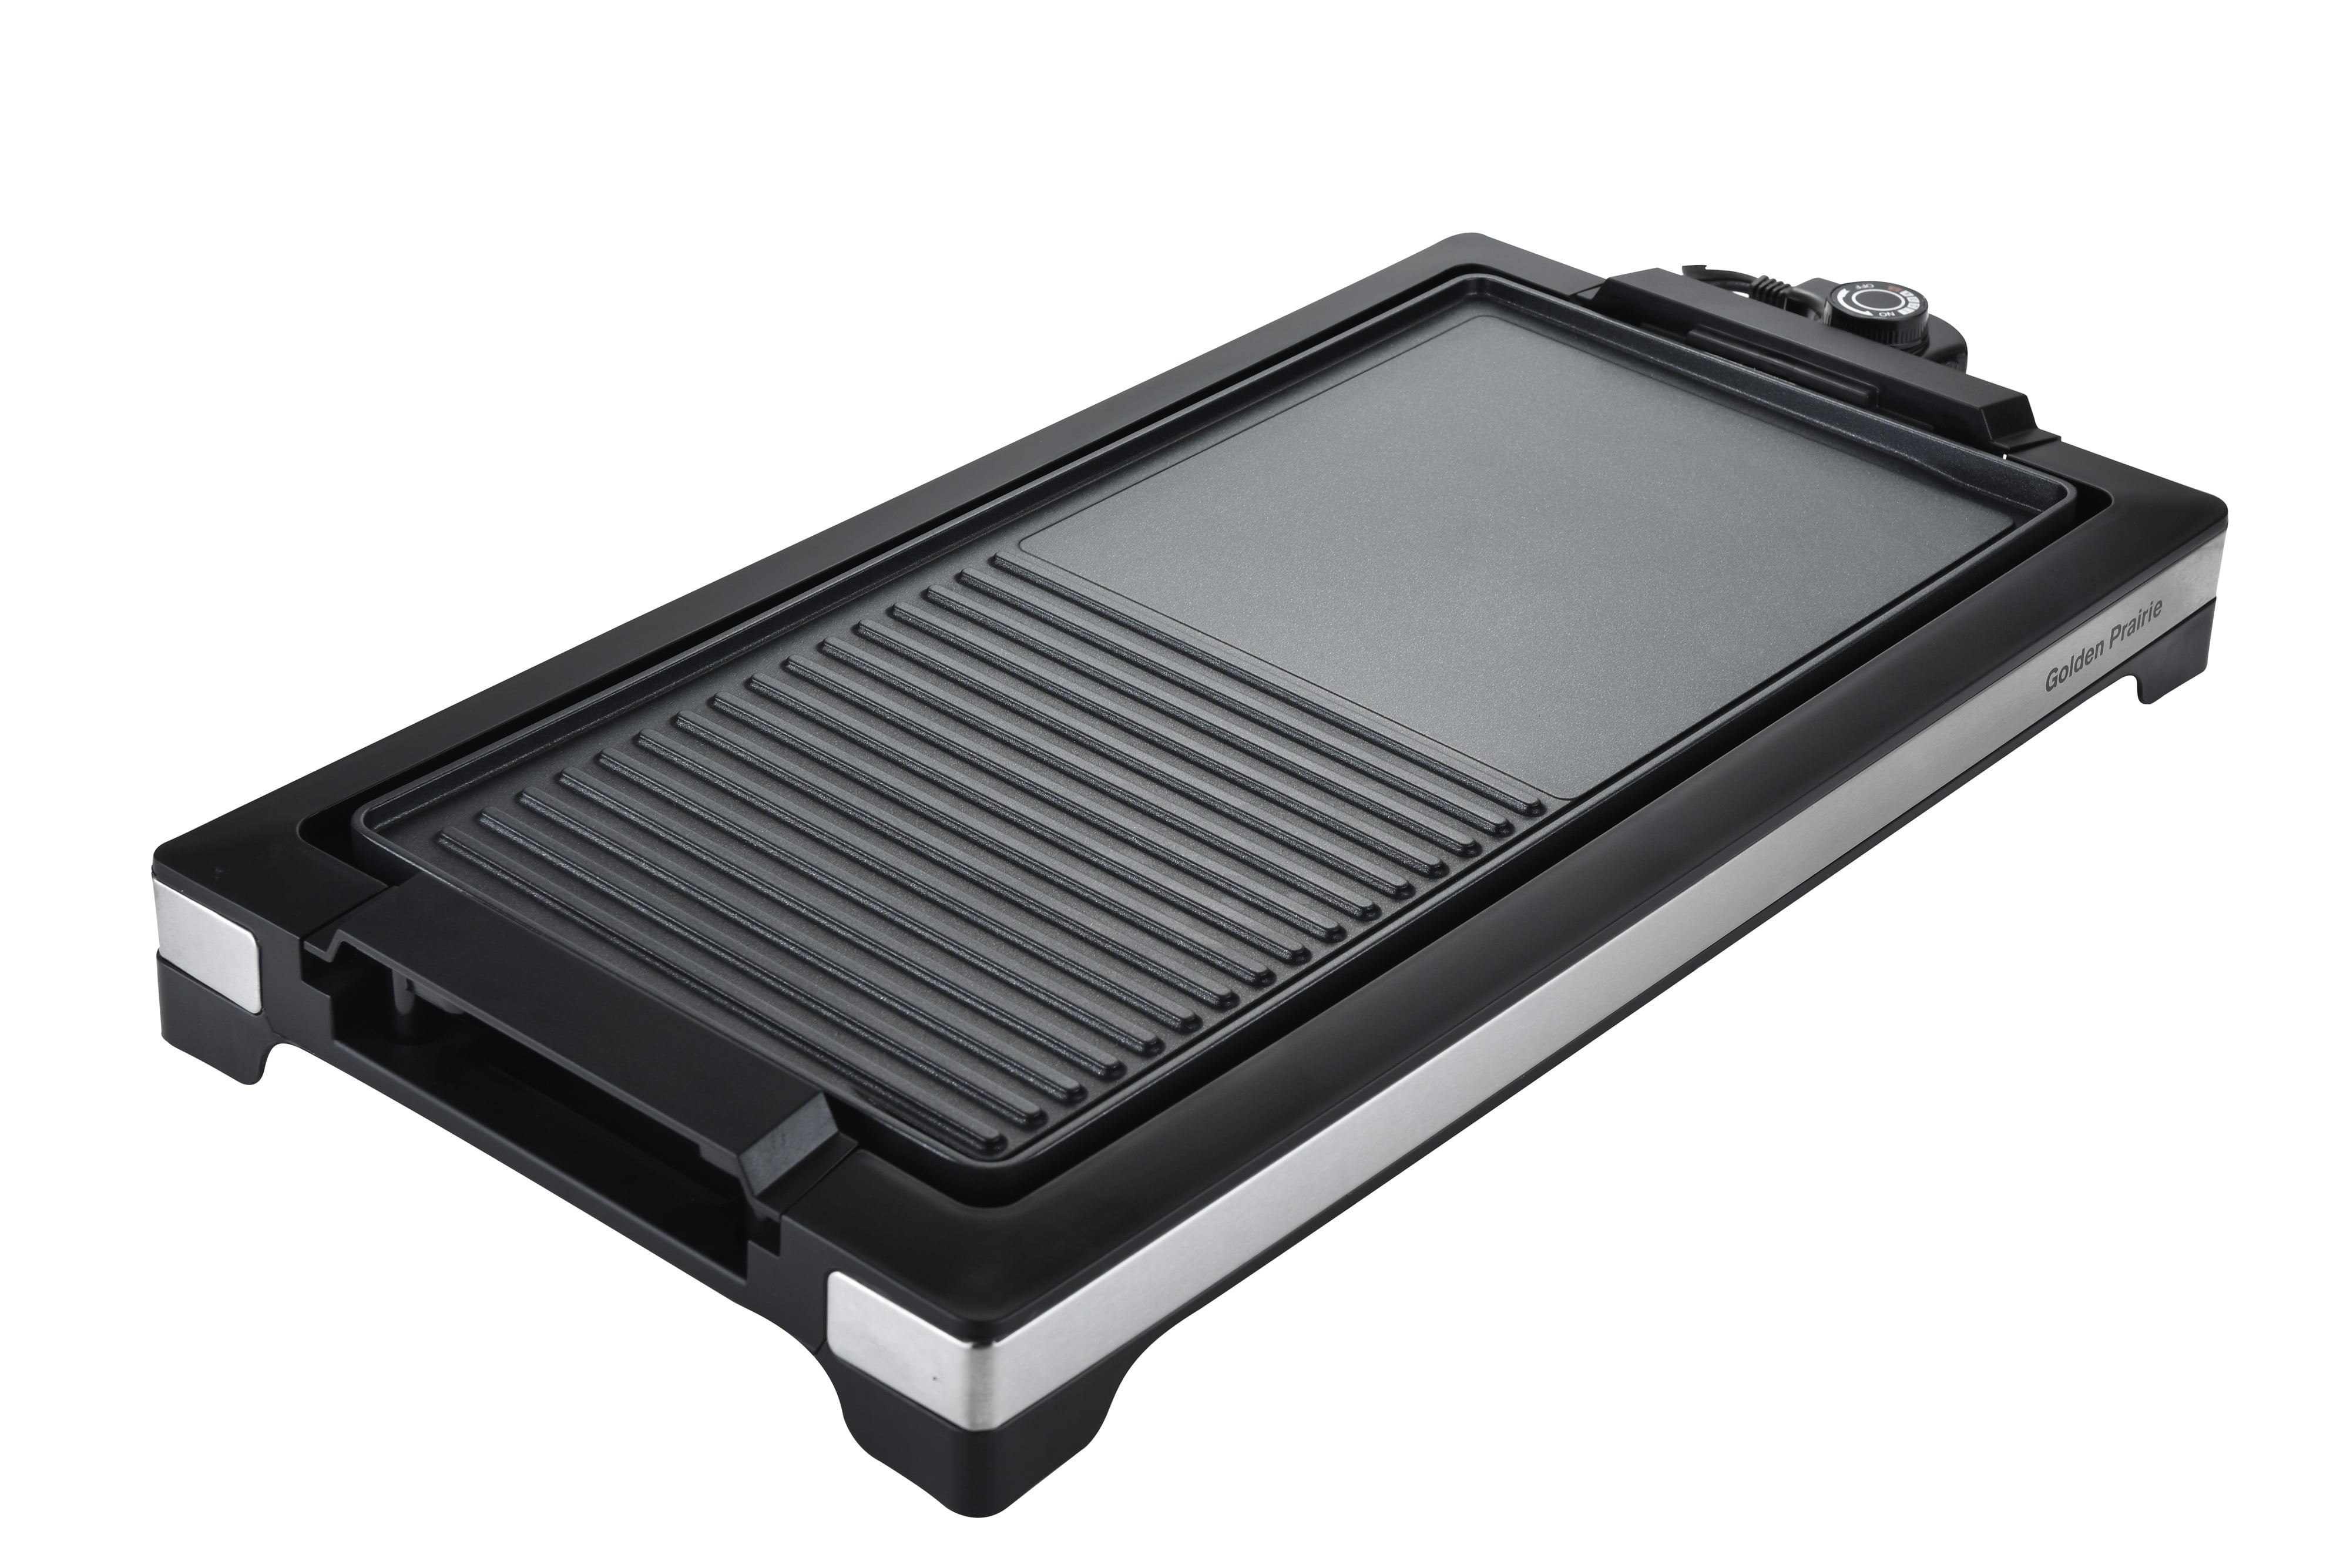 Magic-Mill Electric Smokeless Grill and Griddle Pan for Indoor BBQ in Your Kitchen – Digital Temperature Control - Cooking Timer – Built in Fan for